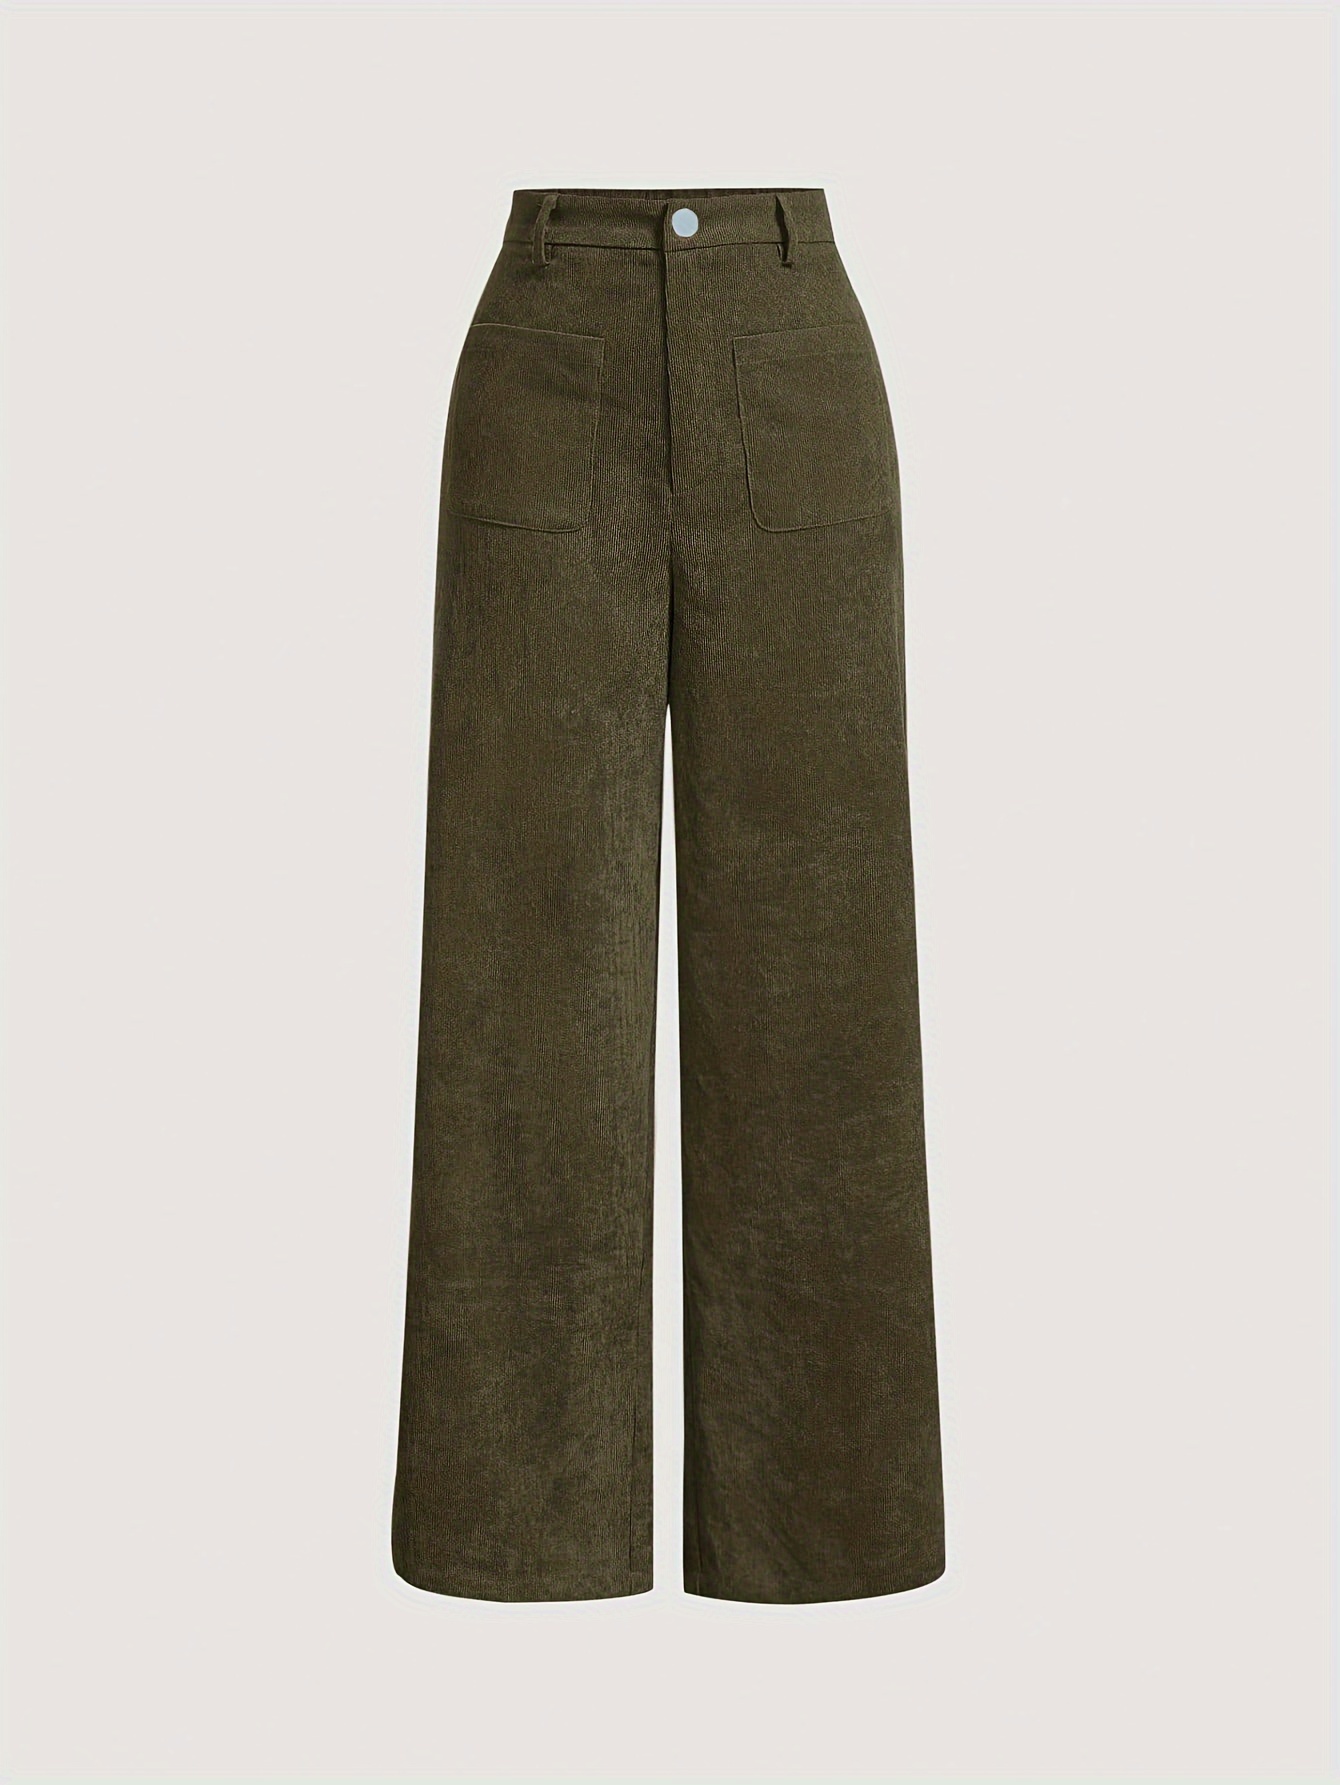 solid corduroy straight leg pants vintage patched pocket loose pants womens clothing details 15